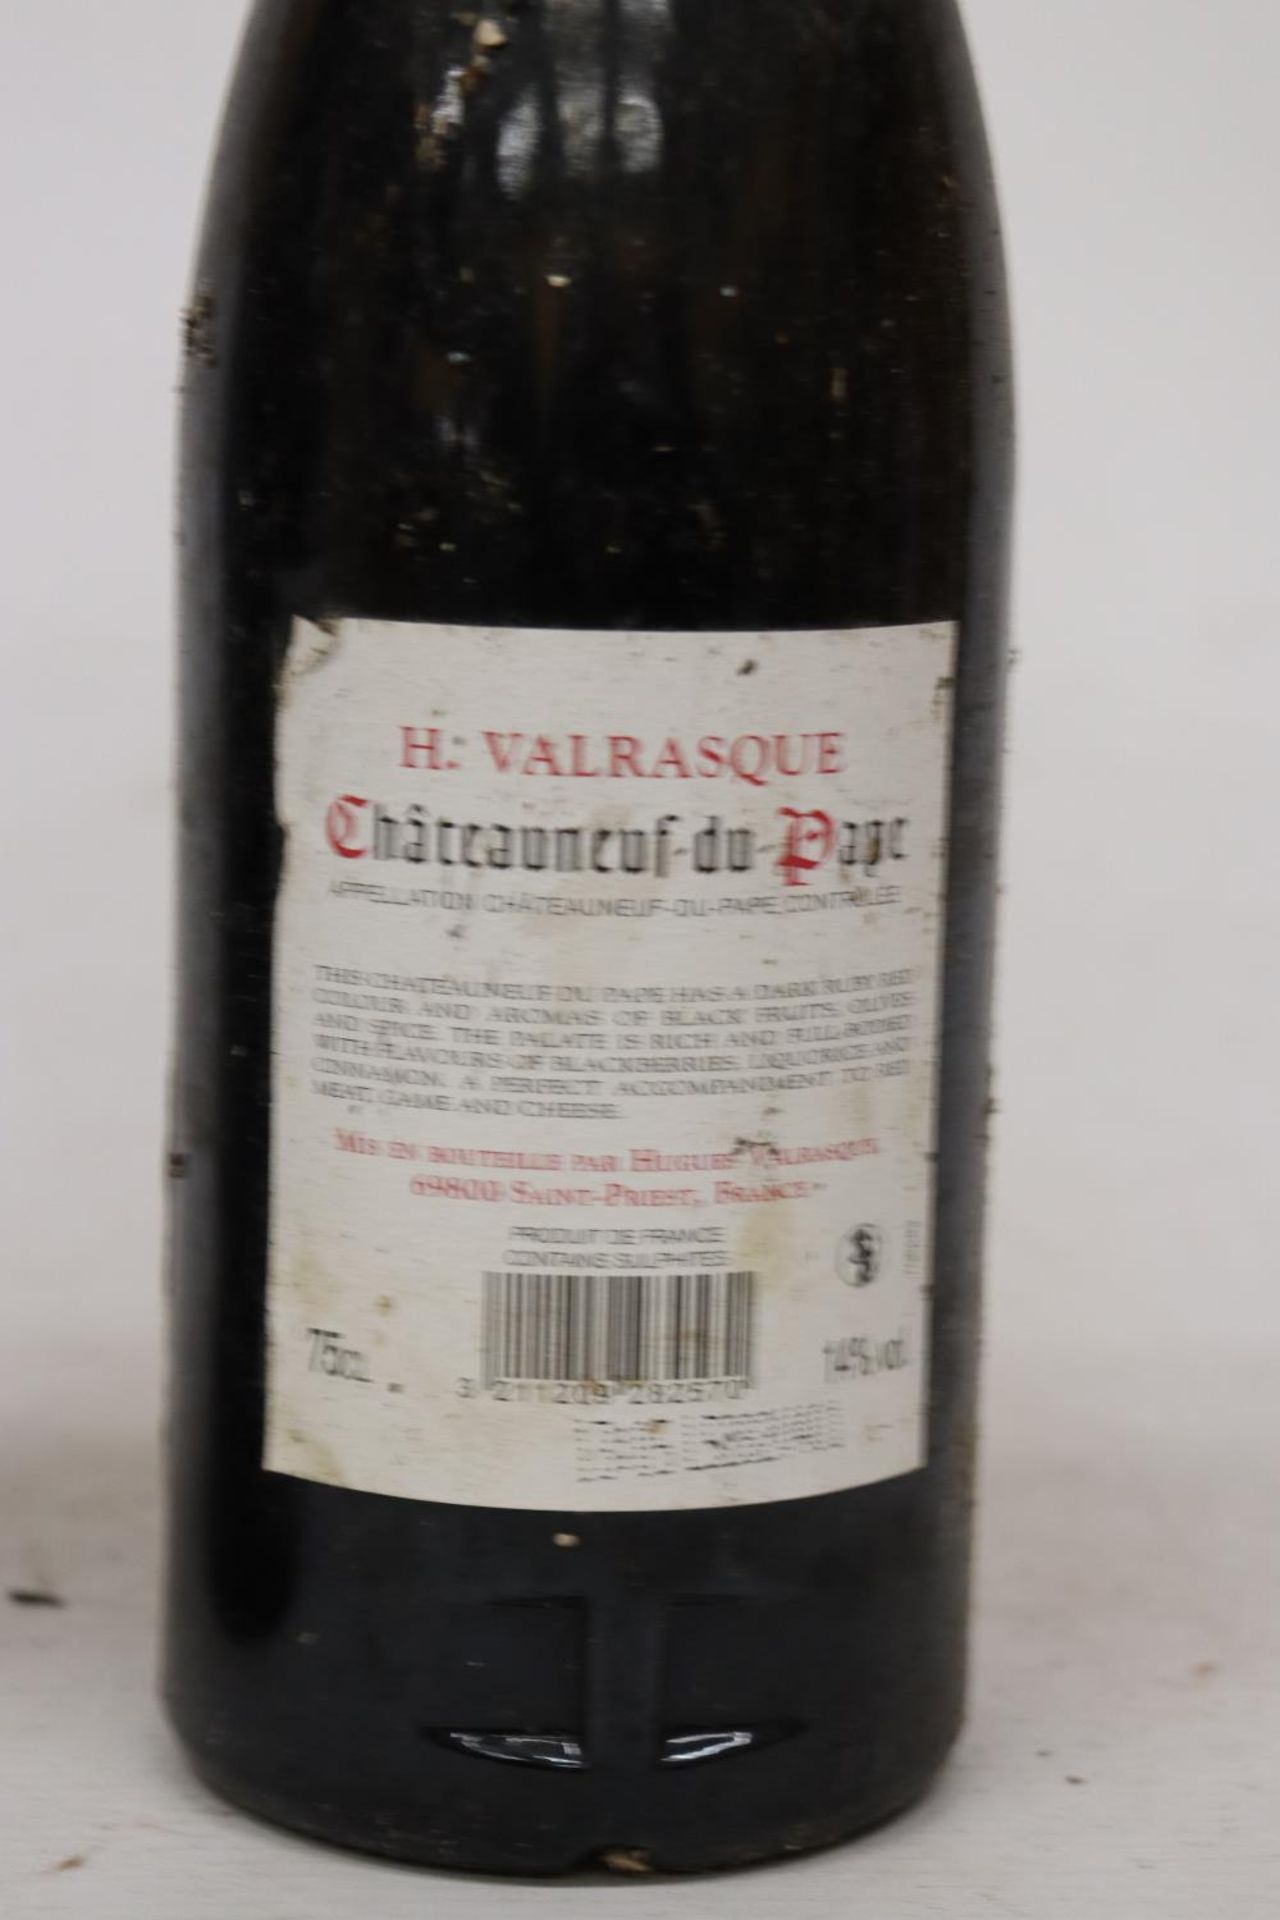 TWO BOTTLES OF H. VALRASQUE CHATEAUNEUF-DU-PAPE 2014 RED WINE - Image 4 of 4